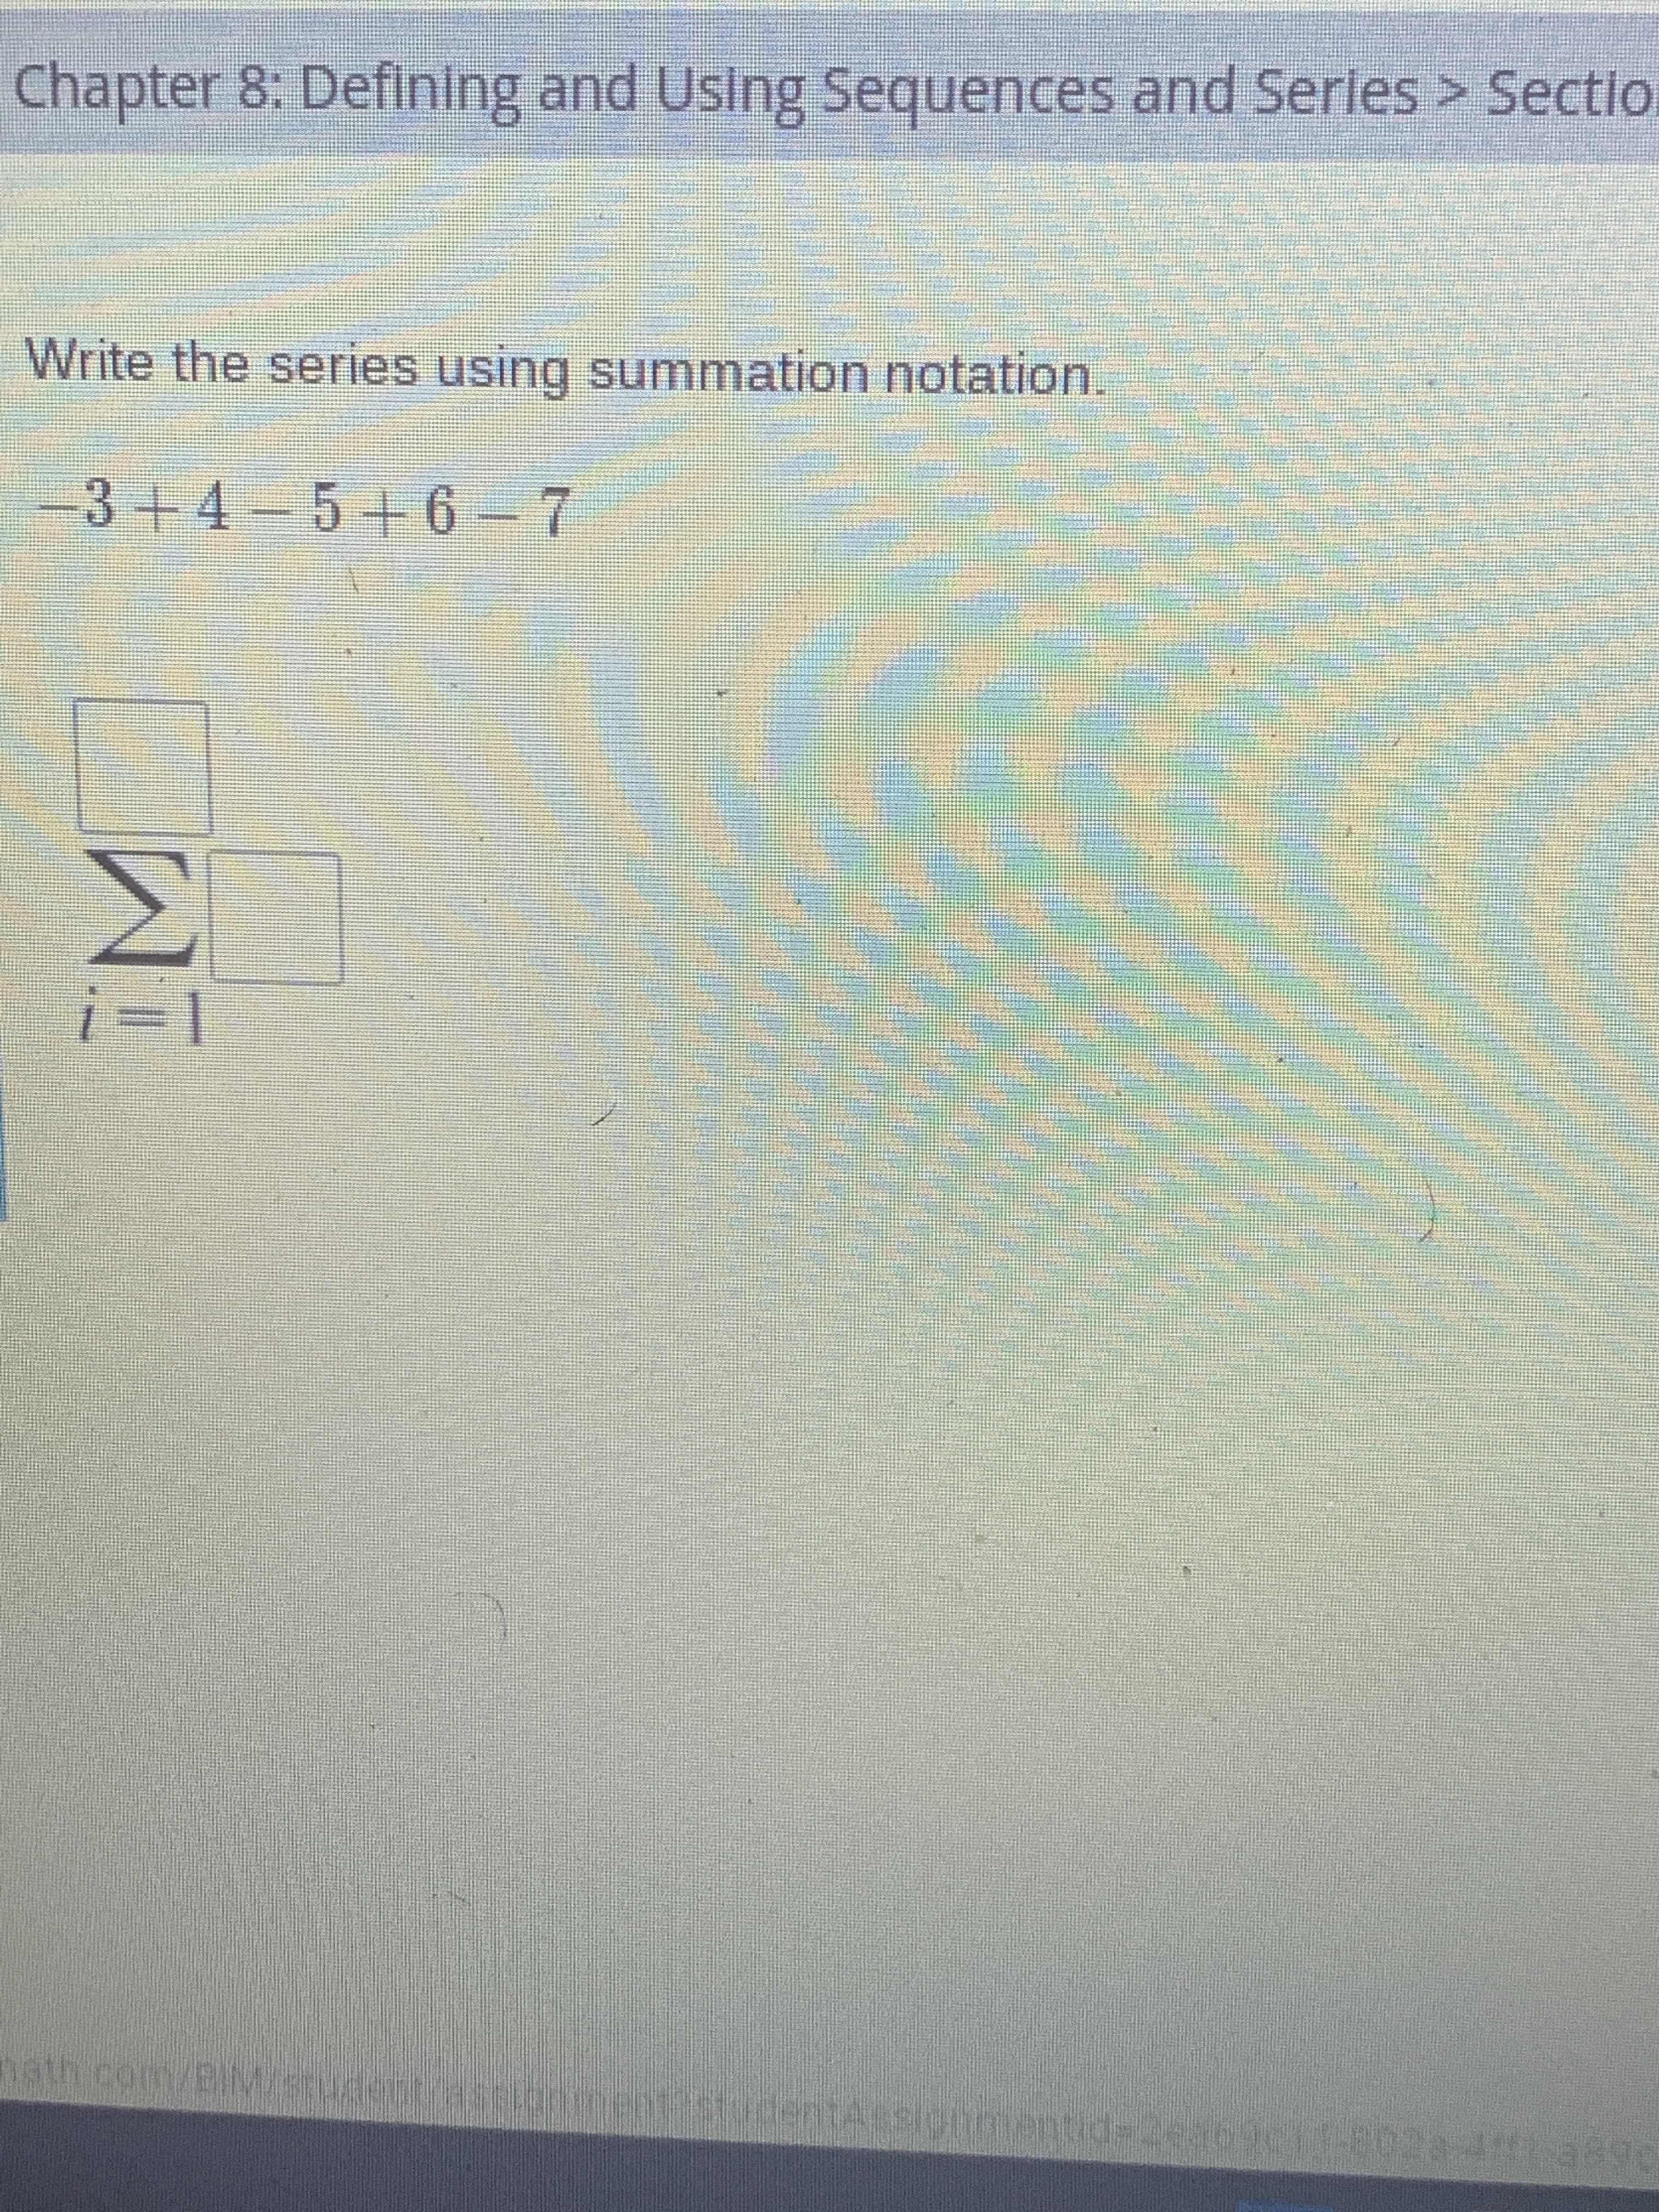 Write the series using summation notation.
-3+4-5+6- 7
